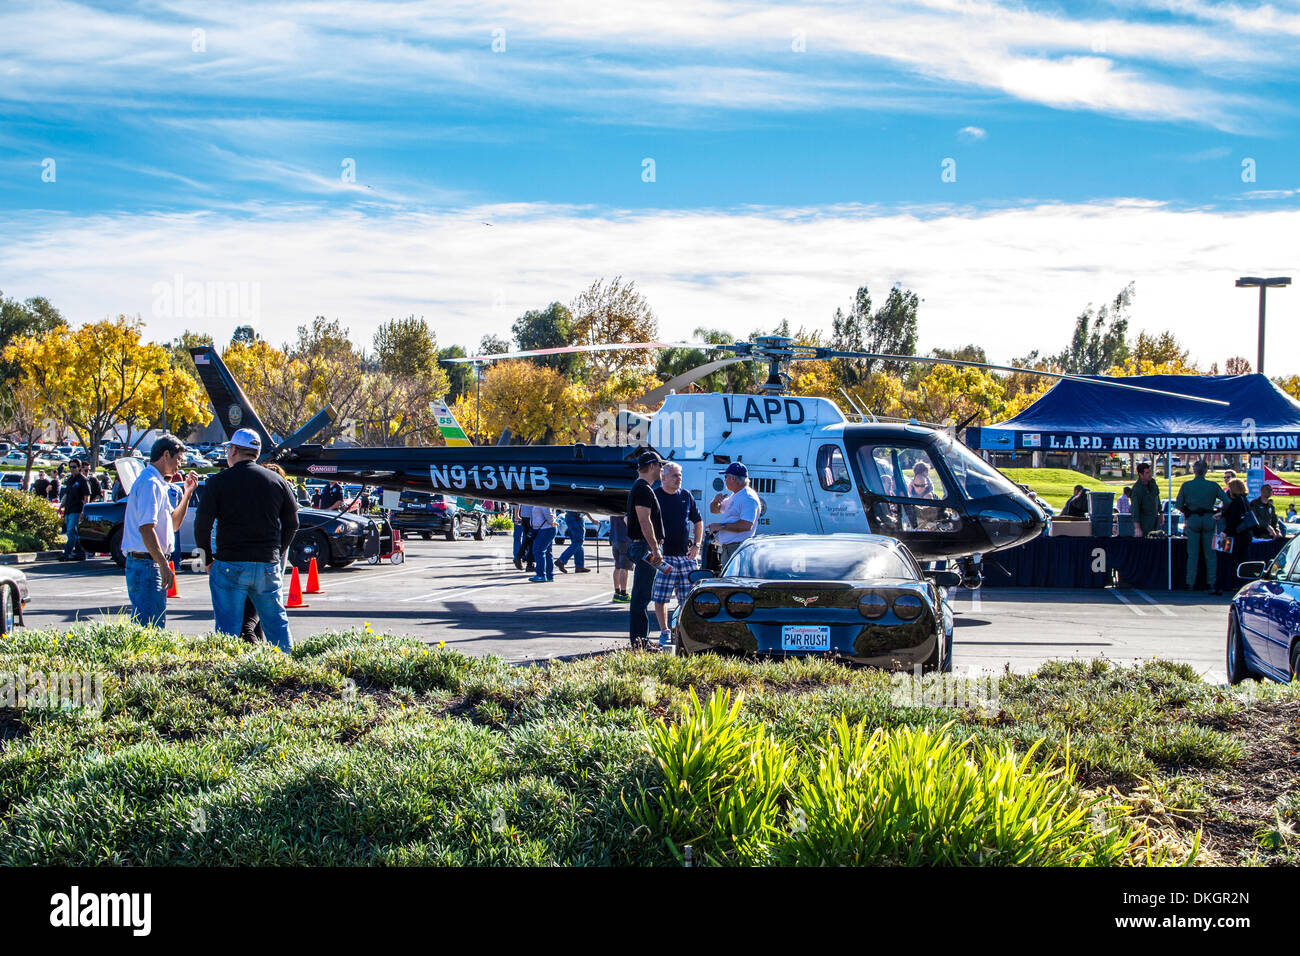 A Los Angeles Police Department Helicopter at the 2013 Motor4toys event in Woodland Hills California Stock Photo